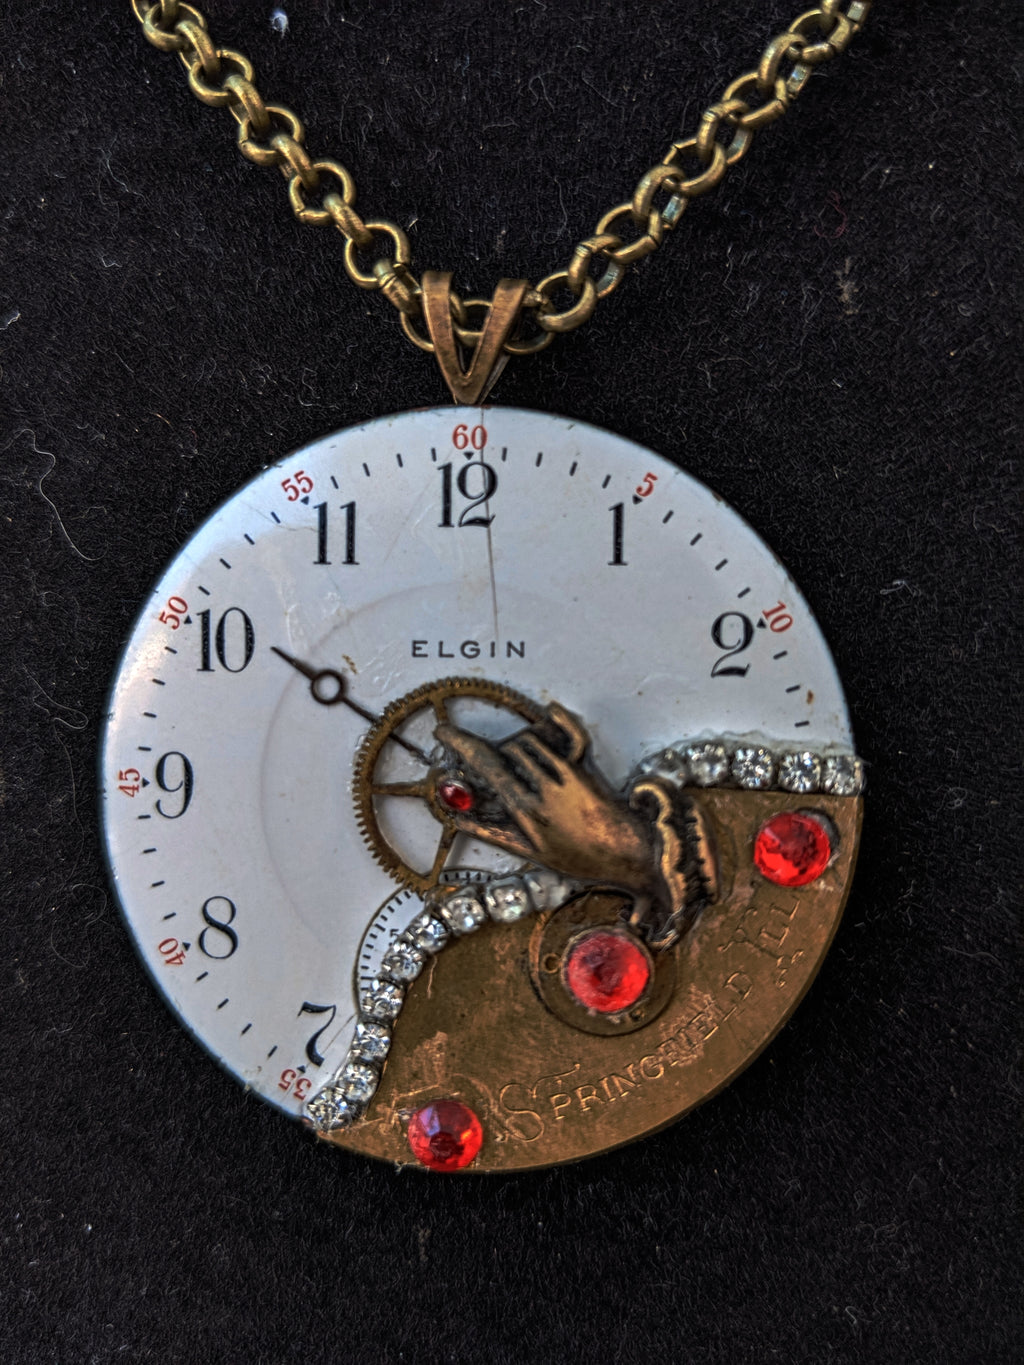 Pocket Watch dial with Springfield, IL bridge cover